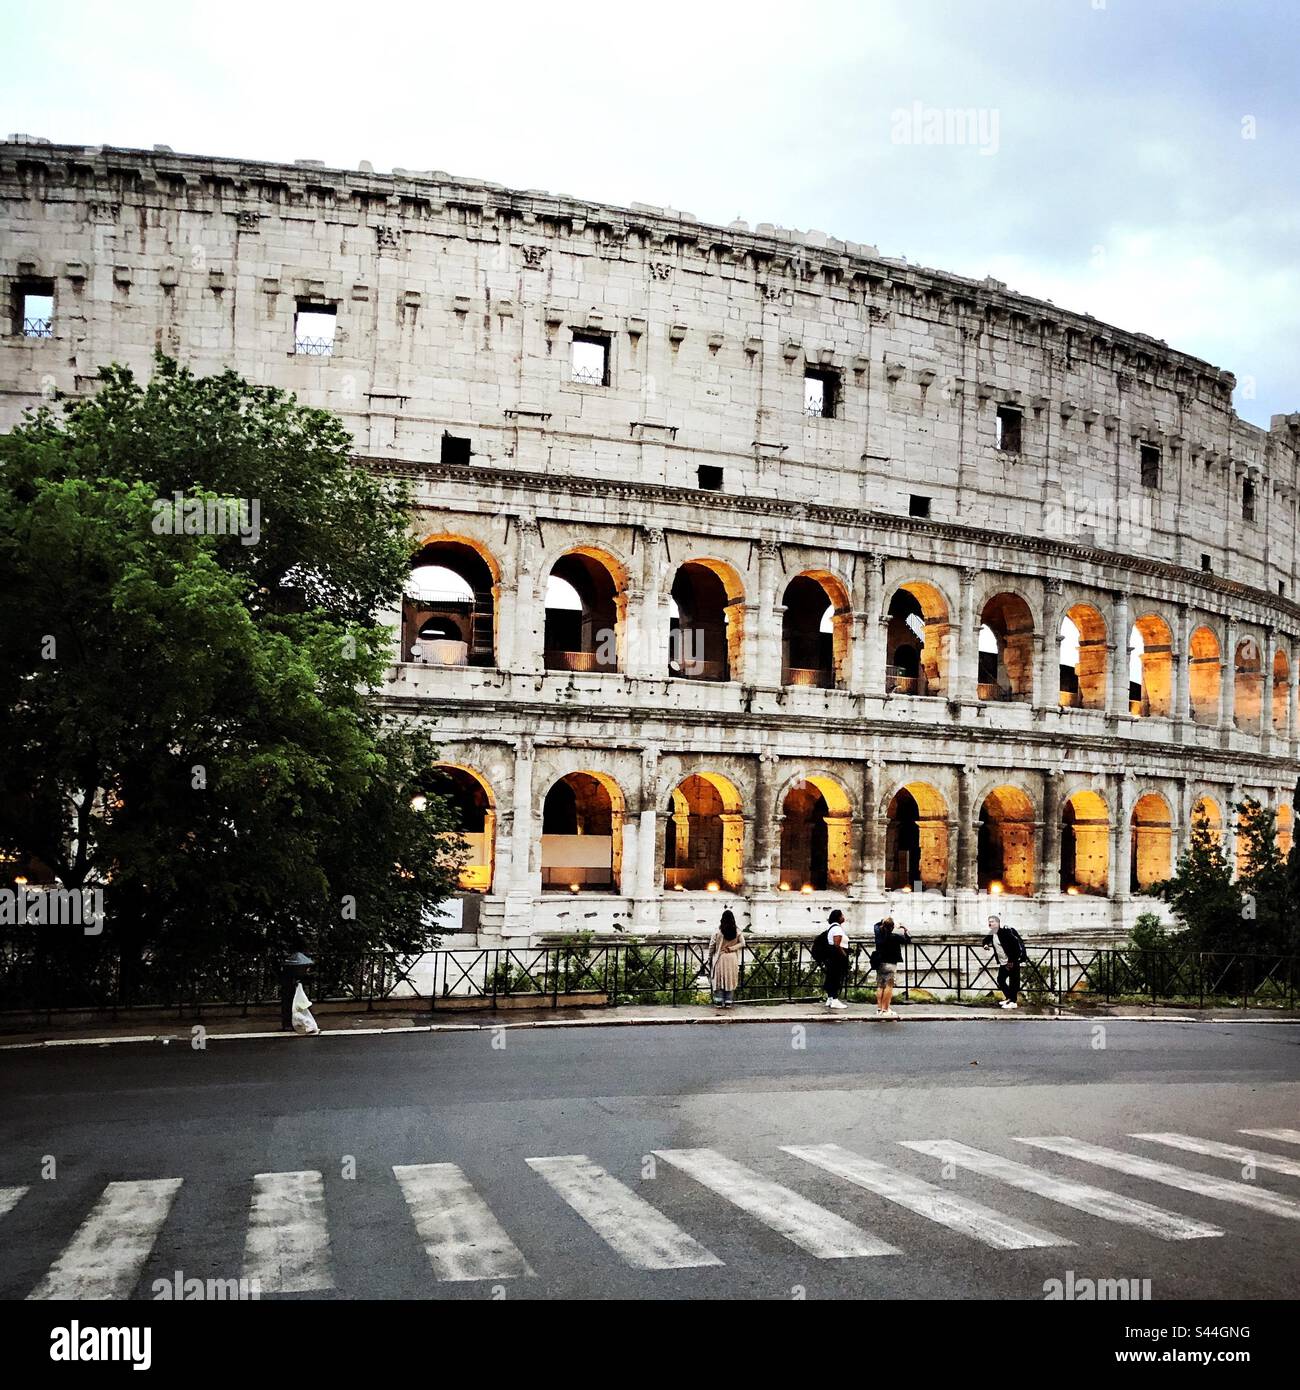 Colosseum, Rome, Italy - May 22, 2023: People taking photographs near the Colosseum in early evening light. Stock Photo